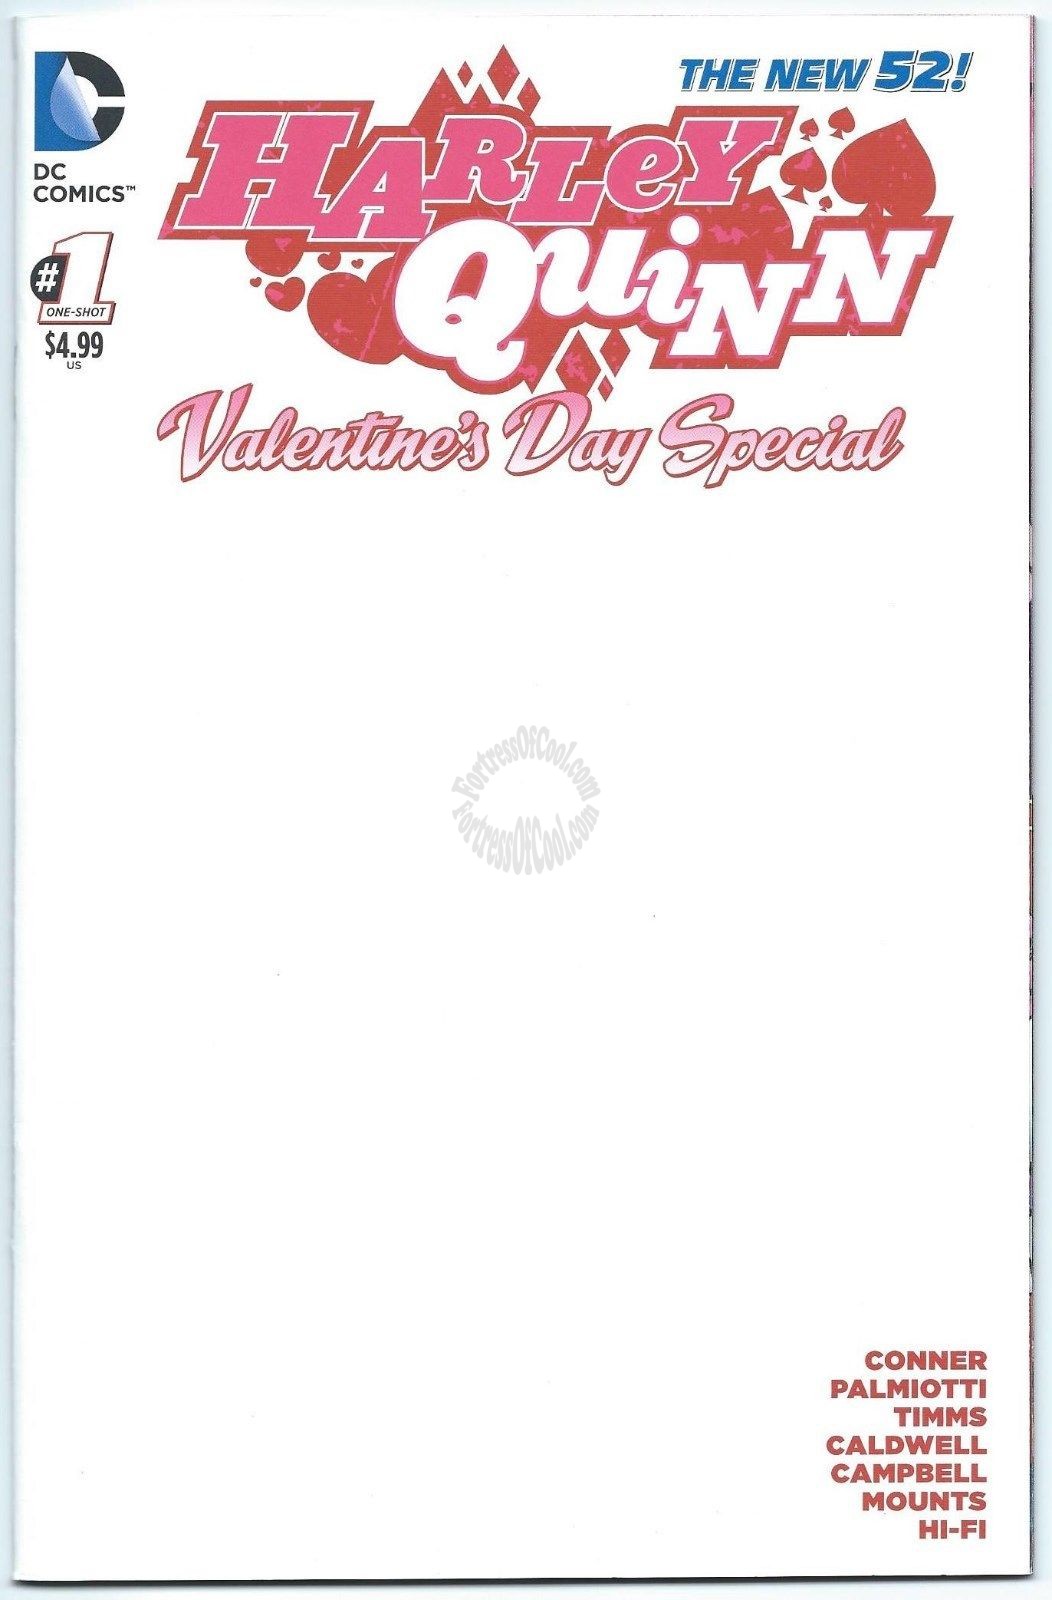 HARLEY QUINN VALENTINES DAY SPECIAL #1 BLANK VARIANT